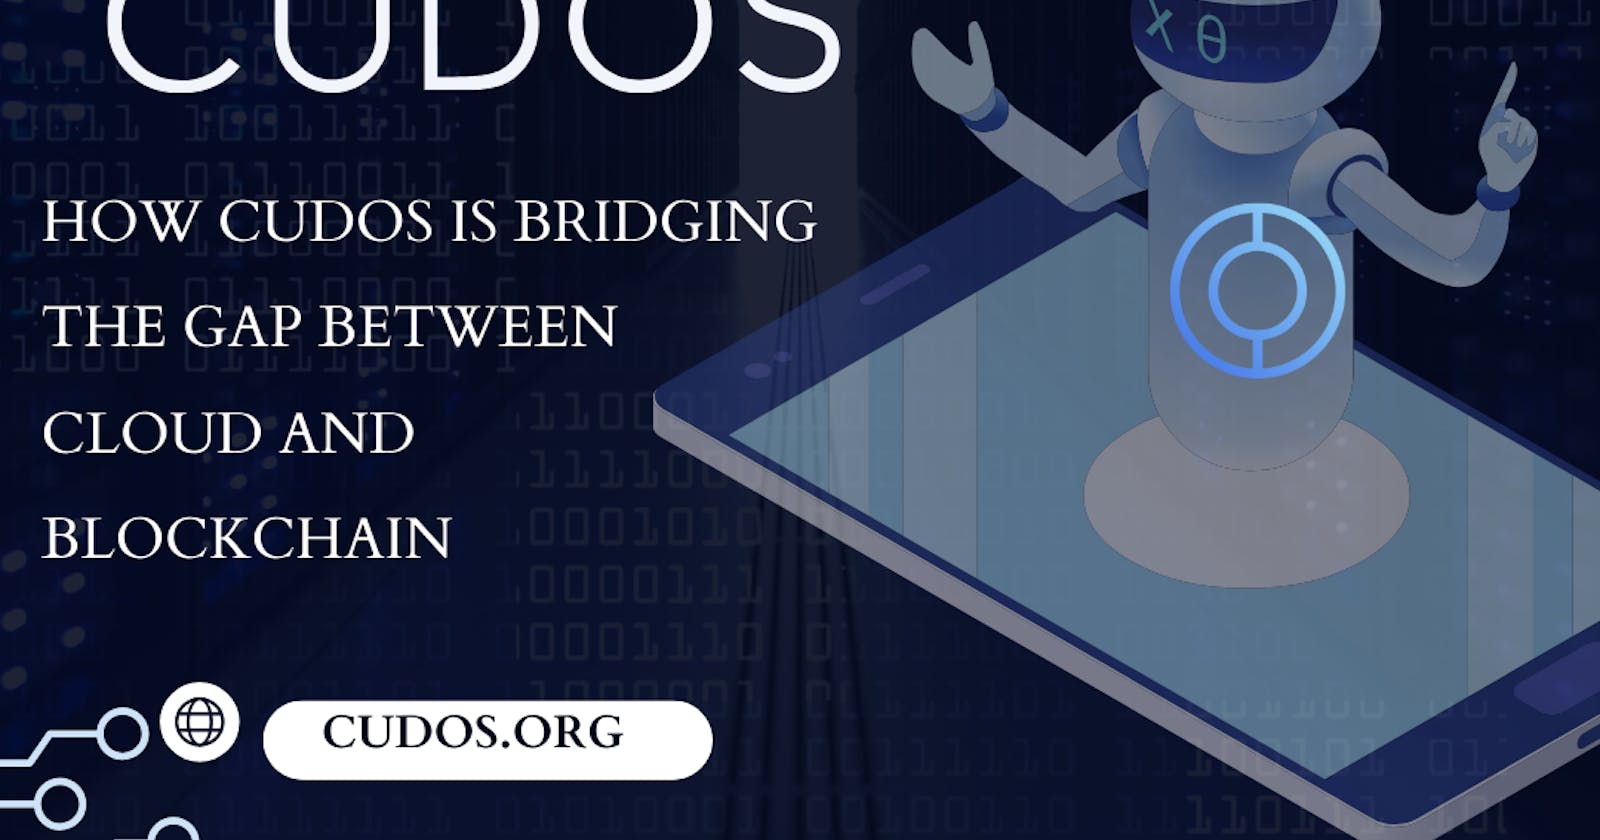 How CUDOS is Bridging the Gap Between Cloud and Blockchain